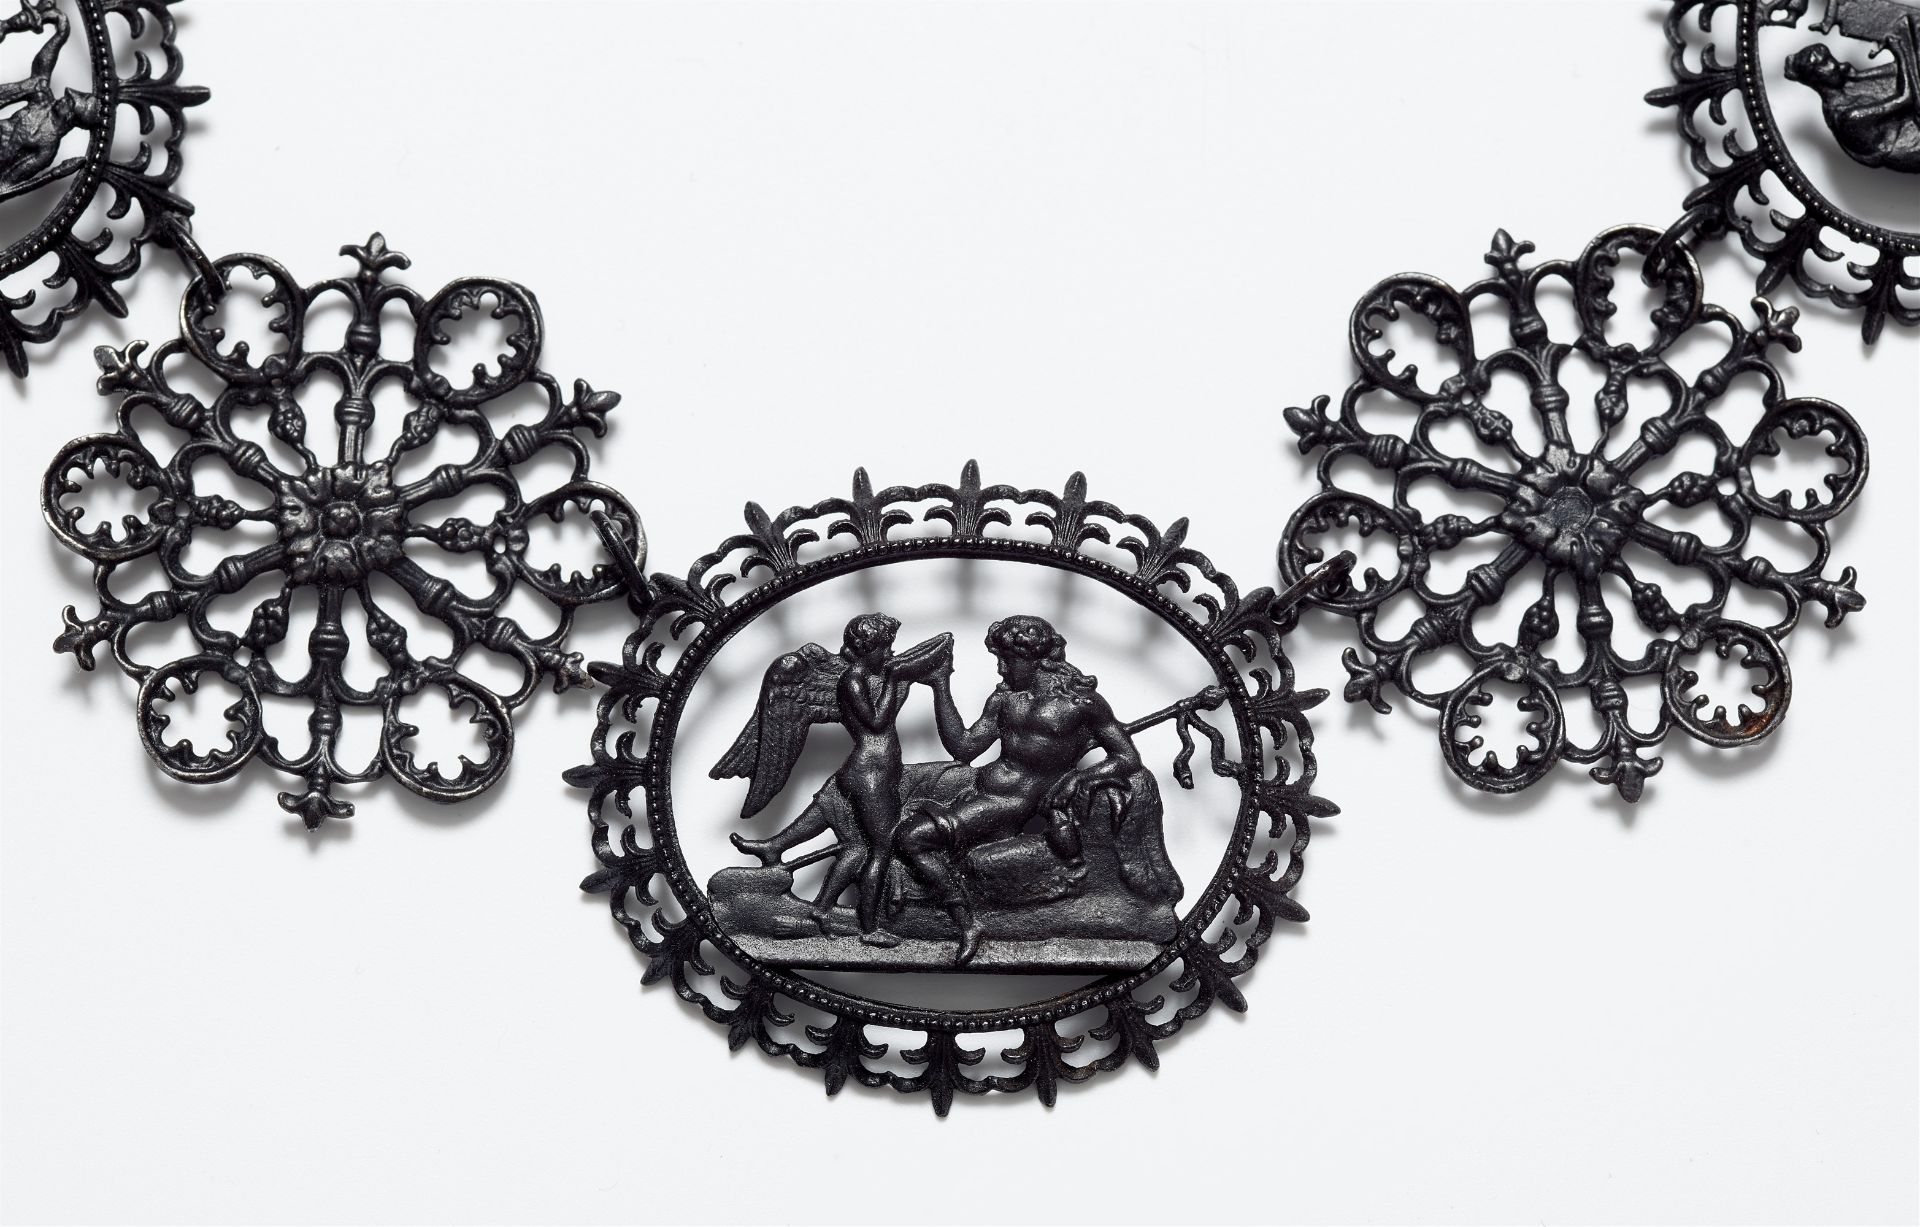 A rare cast iron necklace with Classical motifs - Image 2 of 3